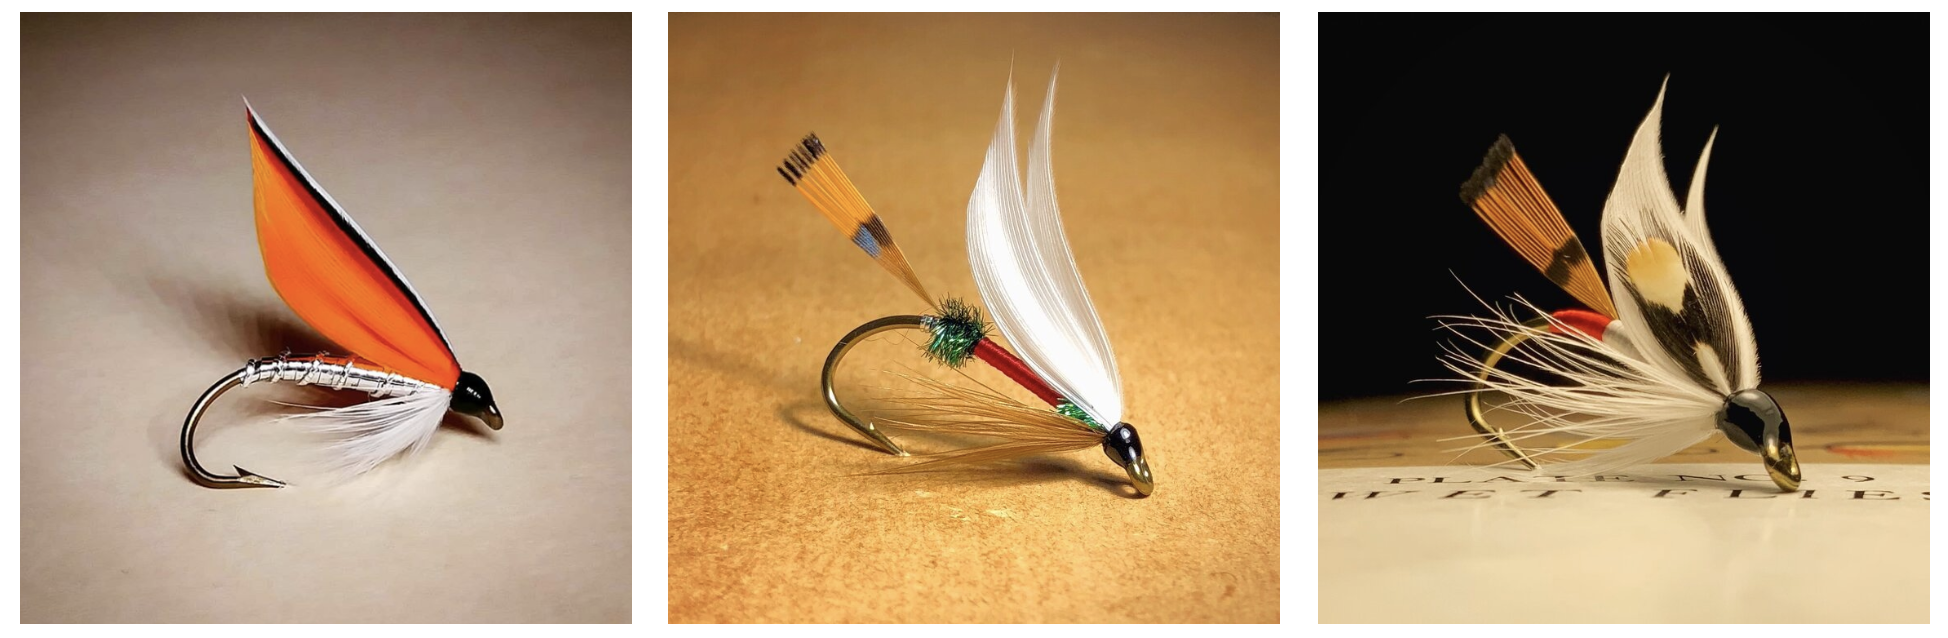 WFS 121 - Classic Wet Flies & Fly Tying with Fred Klein - Ray